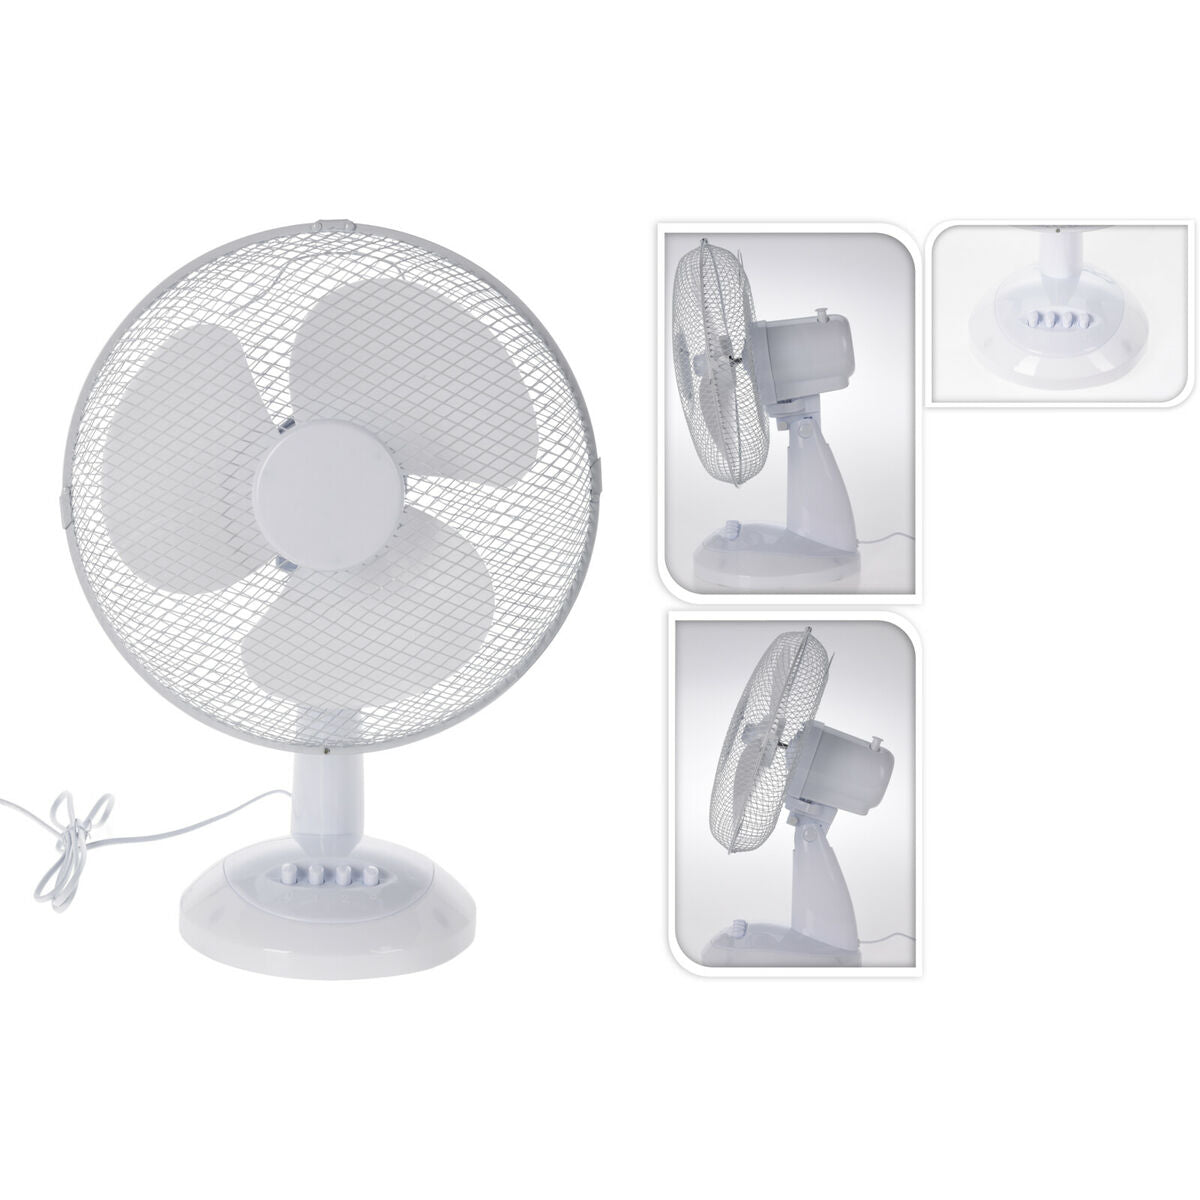 Table Fan Excellent Electrics EL9000160 White, Excellent Electrics, Home and cooking, Portable air conditioning, table-fan-excellent-electrics-el9000160-white, Brand_Excellent Electrics, category-reference-2399, category-reference-2450, category-reference-2451, category-reference-t-19656, category-reference-t-21087, category-reference-t-25217, Condition_NEW, ferretería, Price_20 - 50, summer, RiotNook